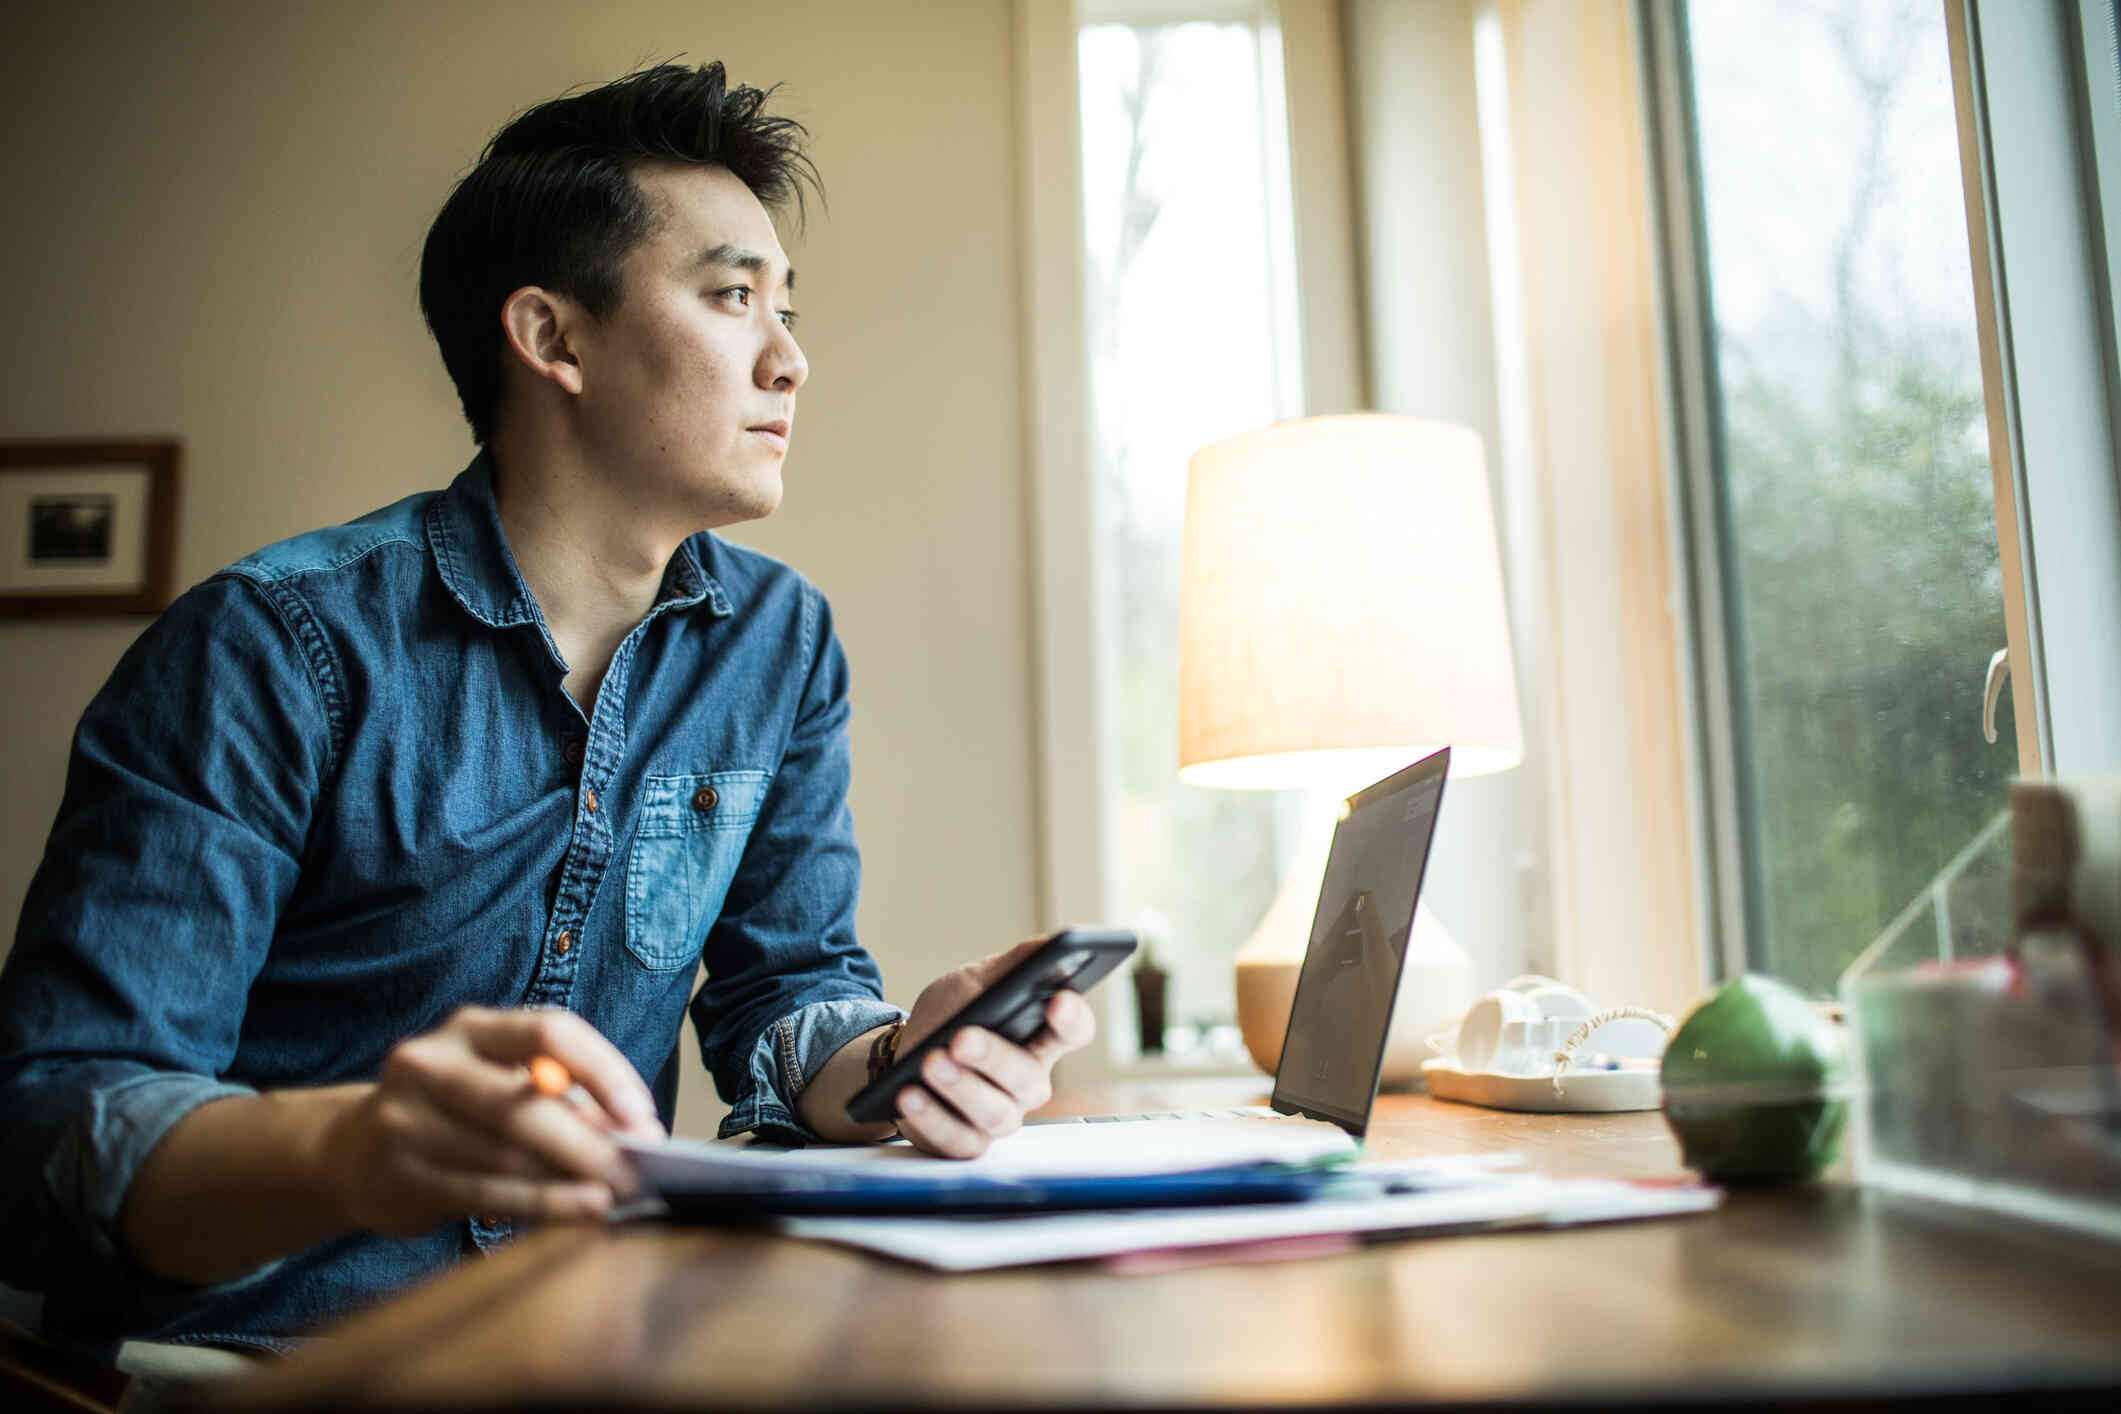 A man in a bluejean shirt sits at a table with his laptop and some papers while holding his phone in his hand as he looks out of the window infront of with with a serious expression.